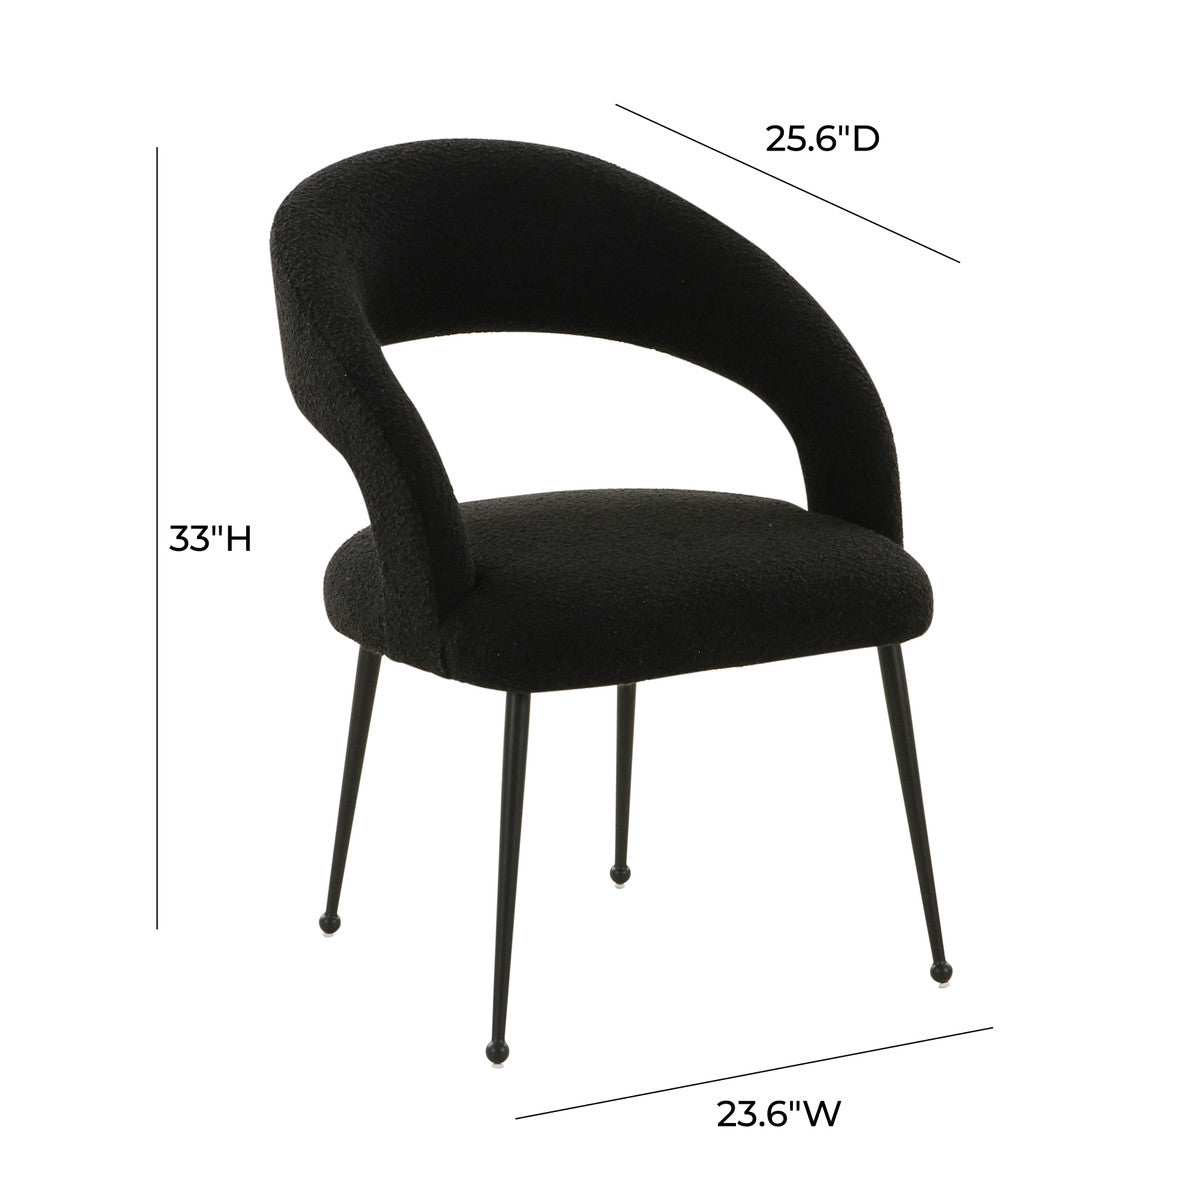 Modena Black Boucle Dining Chair - Luxury Living Collection